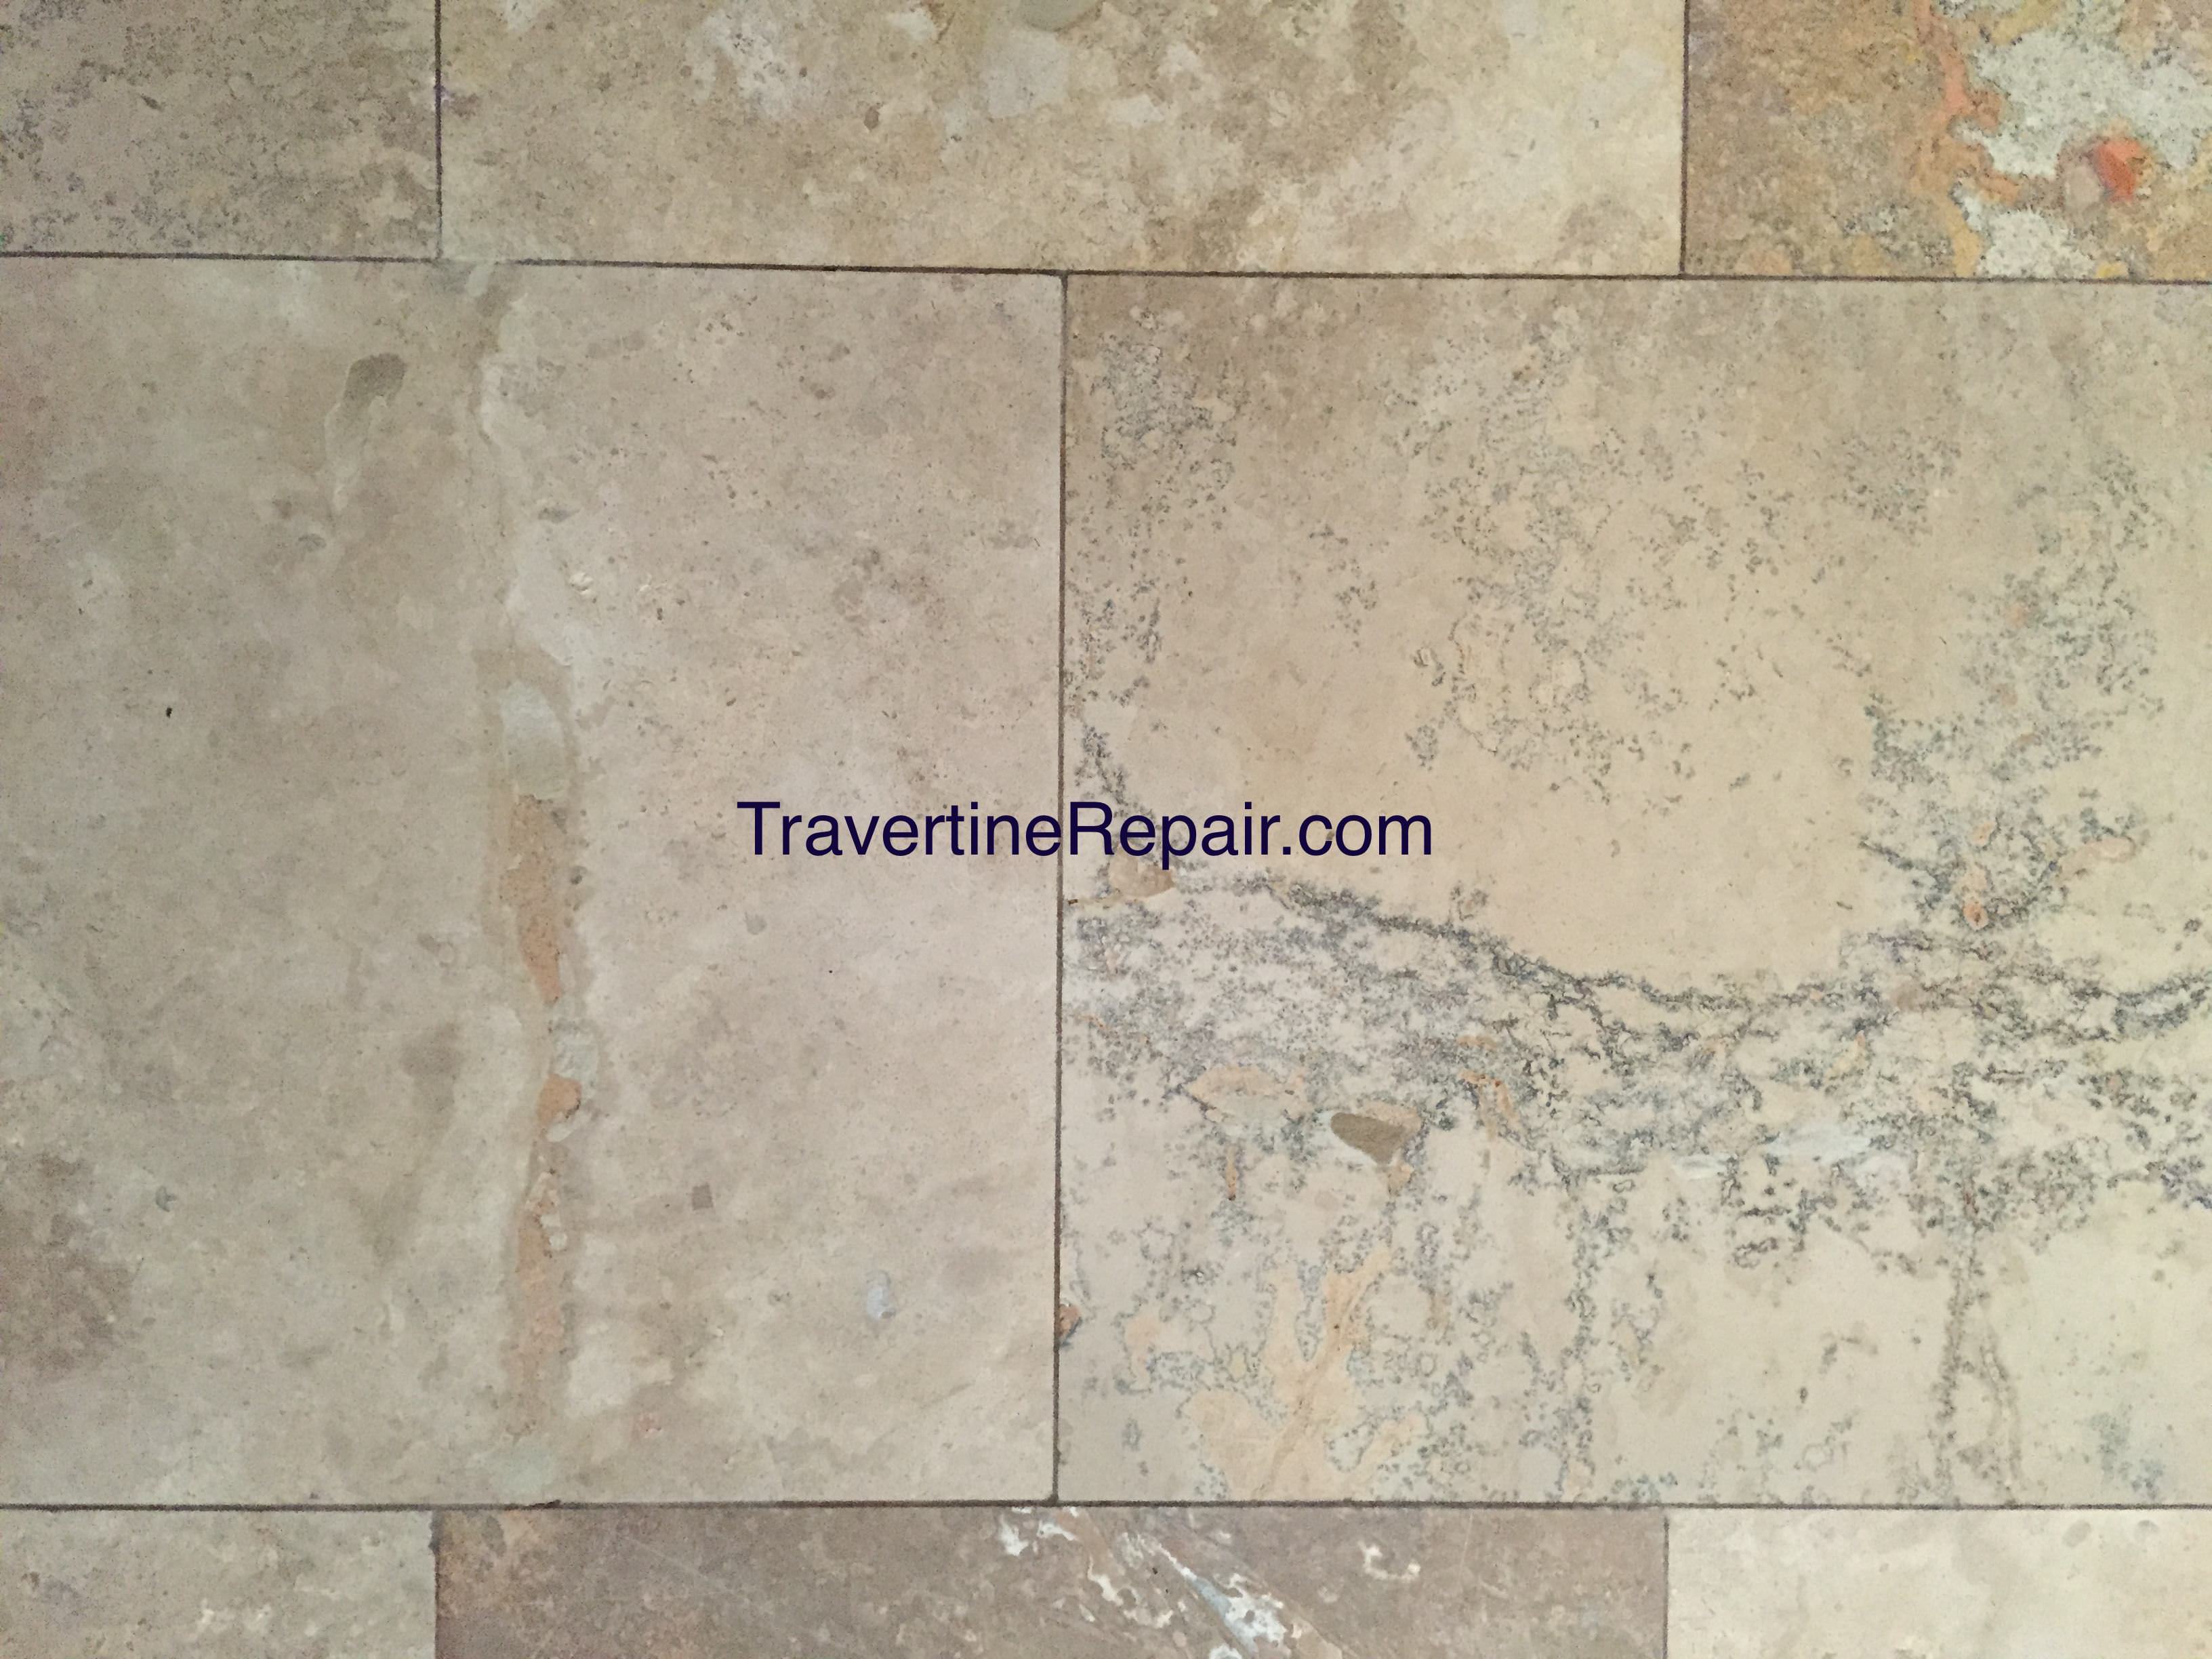 travertine chipping after repairs